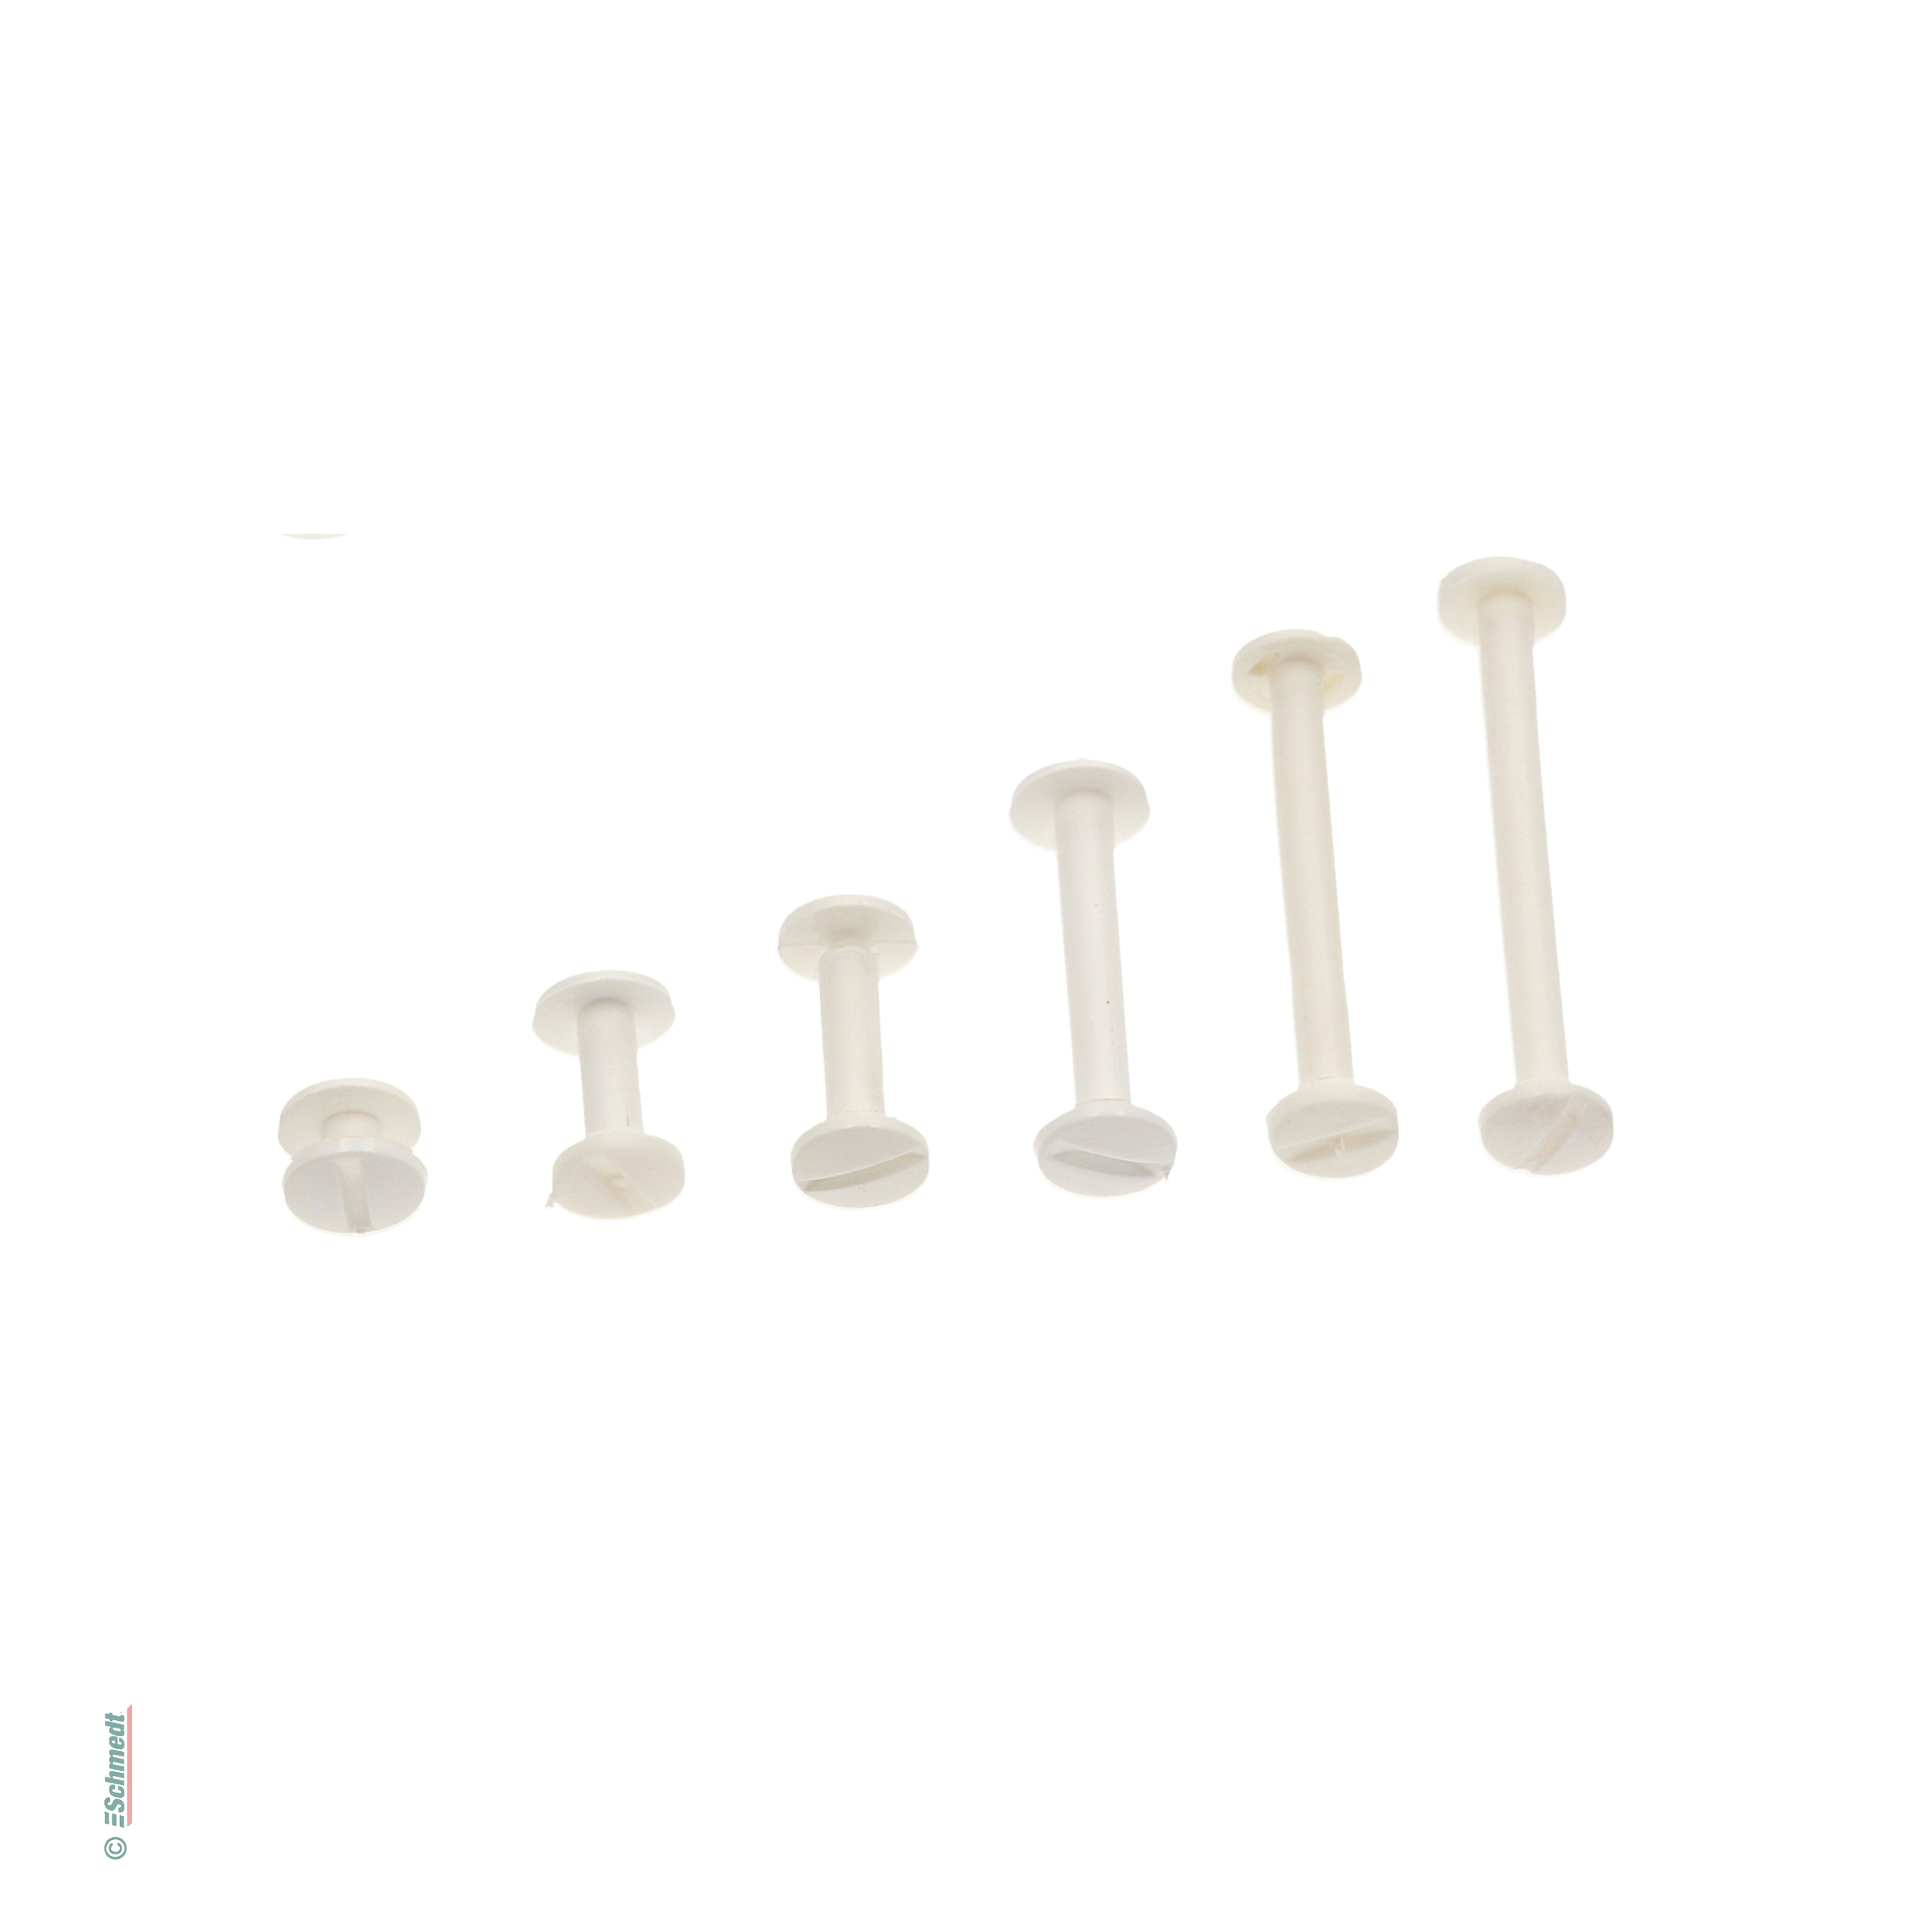 Binding screws, plastic - Colour white - Filling height (in mm) 5 - Applications: With binding screws (screw posts), books, brochures and lo...